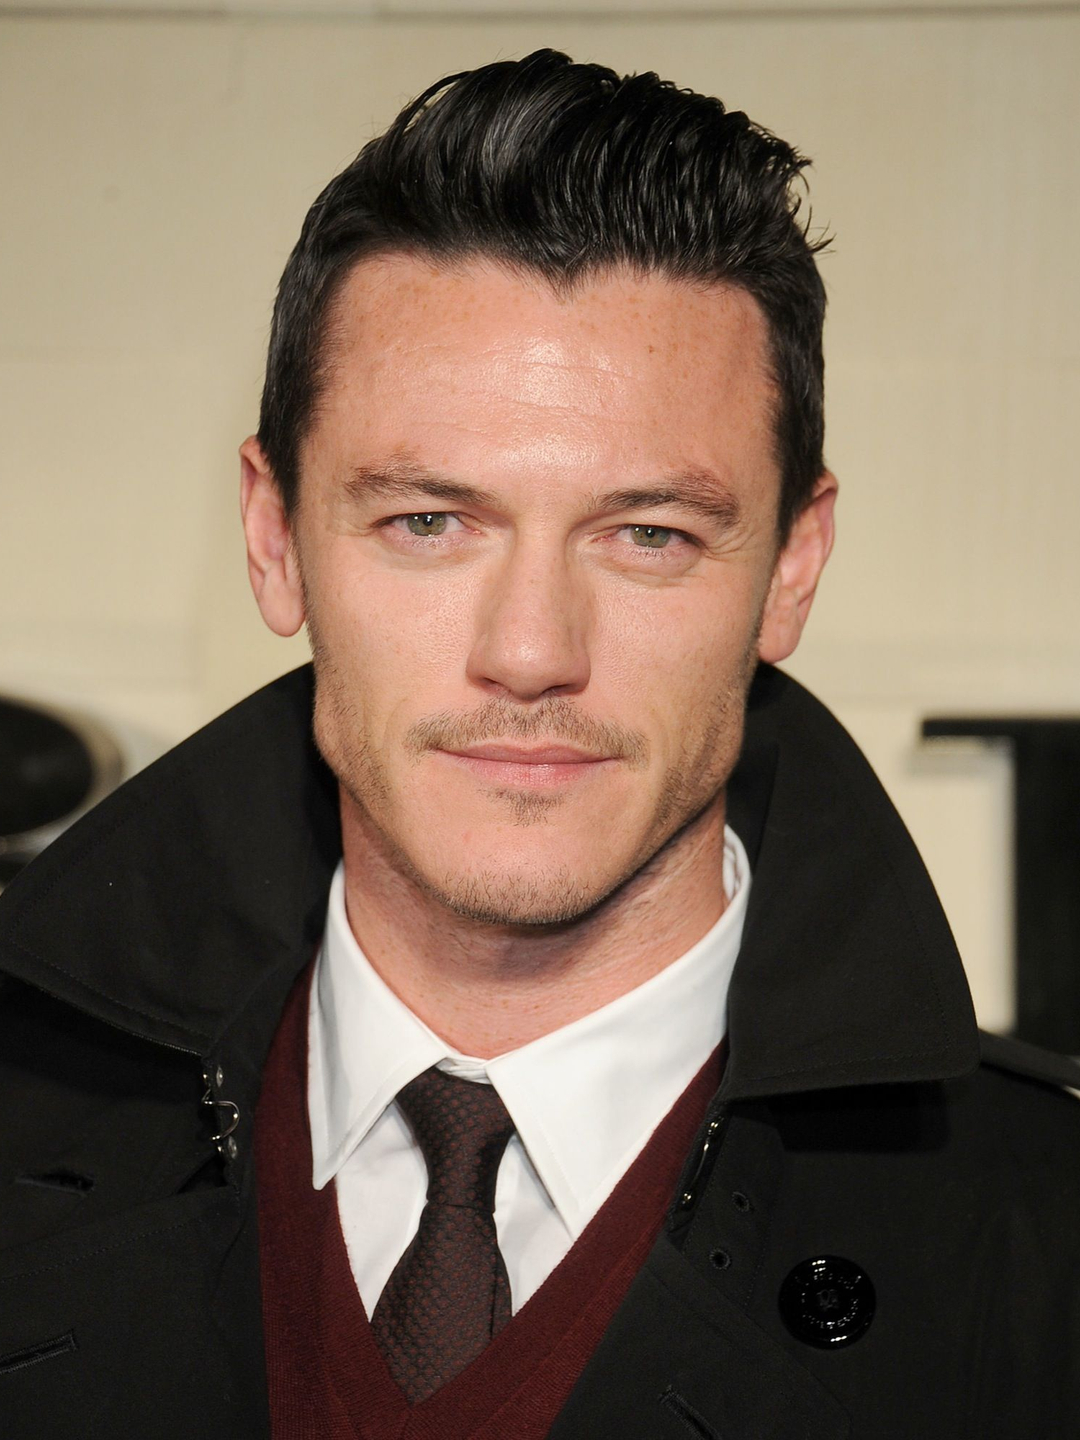 Luke Evans who are his parents